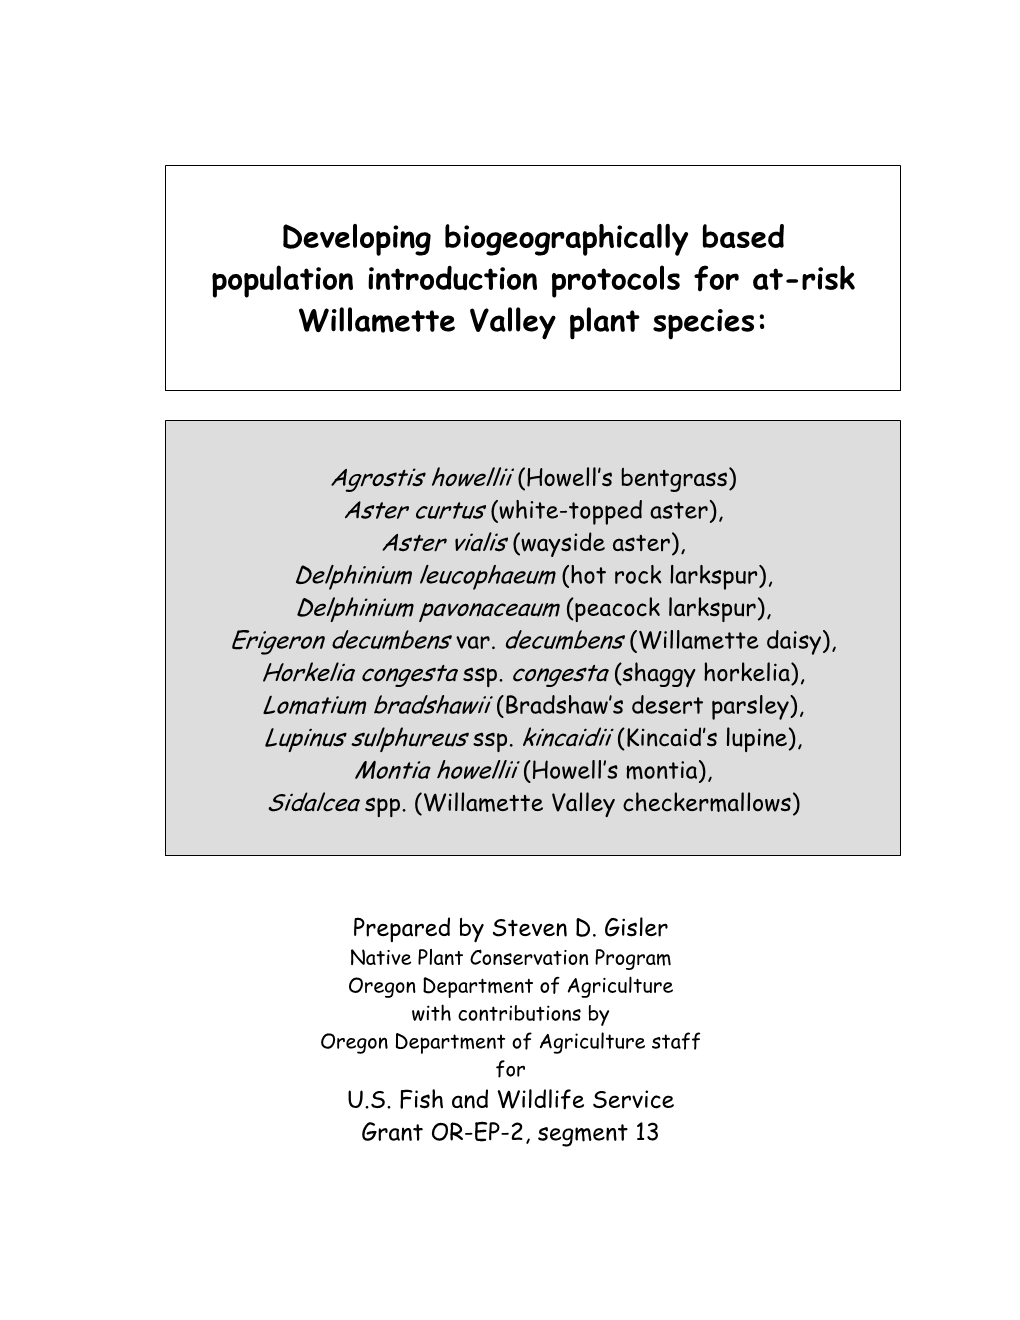 Developing Biogeographically Based Population Introduction Protocols for At-Risk Willamette Valley Plant Species